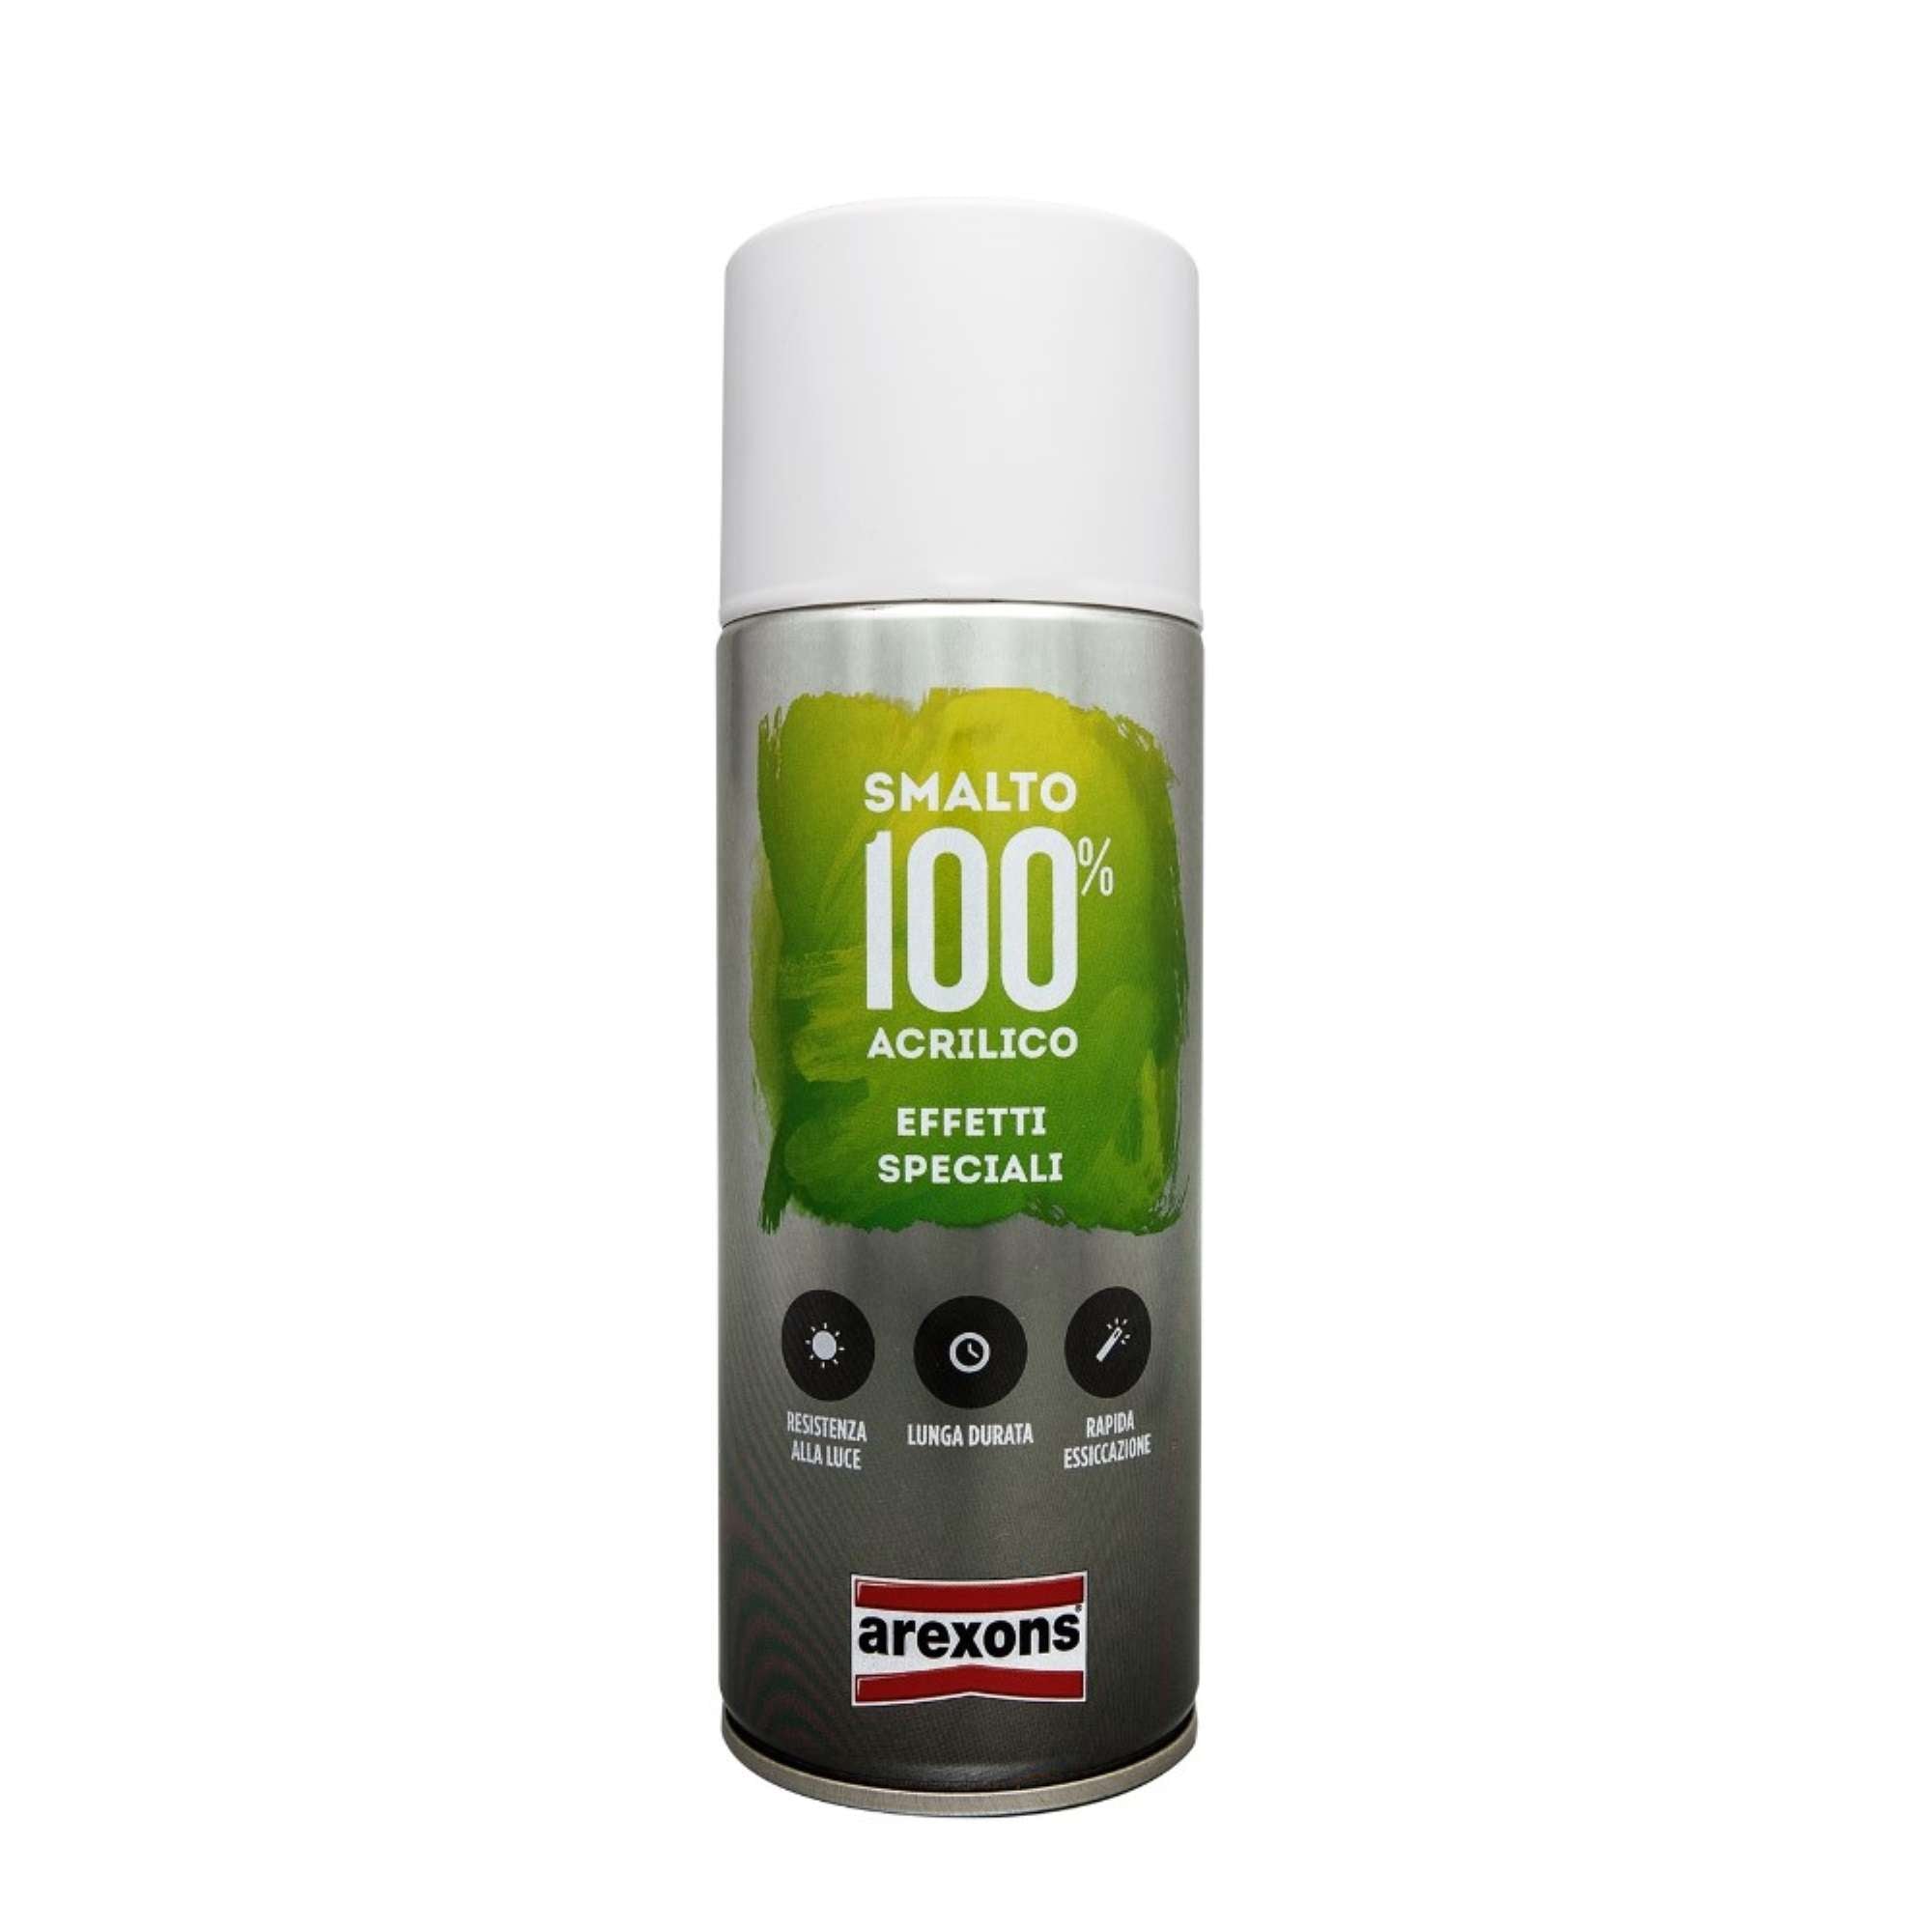 Spray enamel 100% acrylic special effects silver 400ml - Arexons 3673